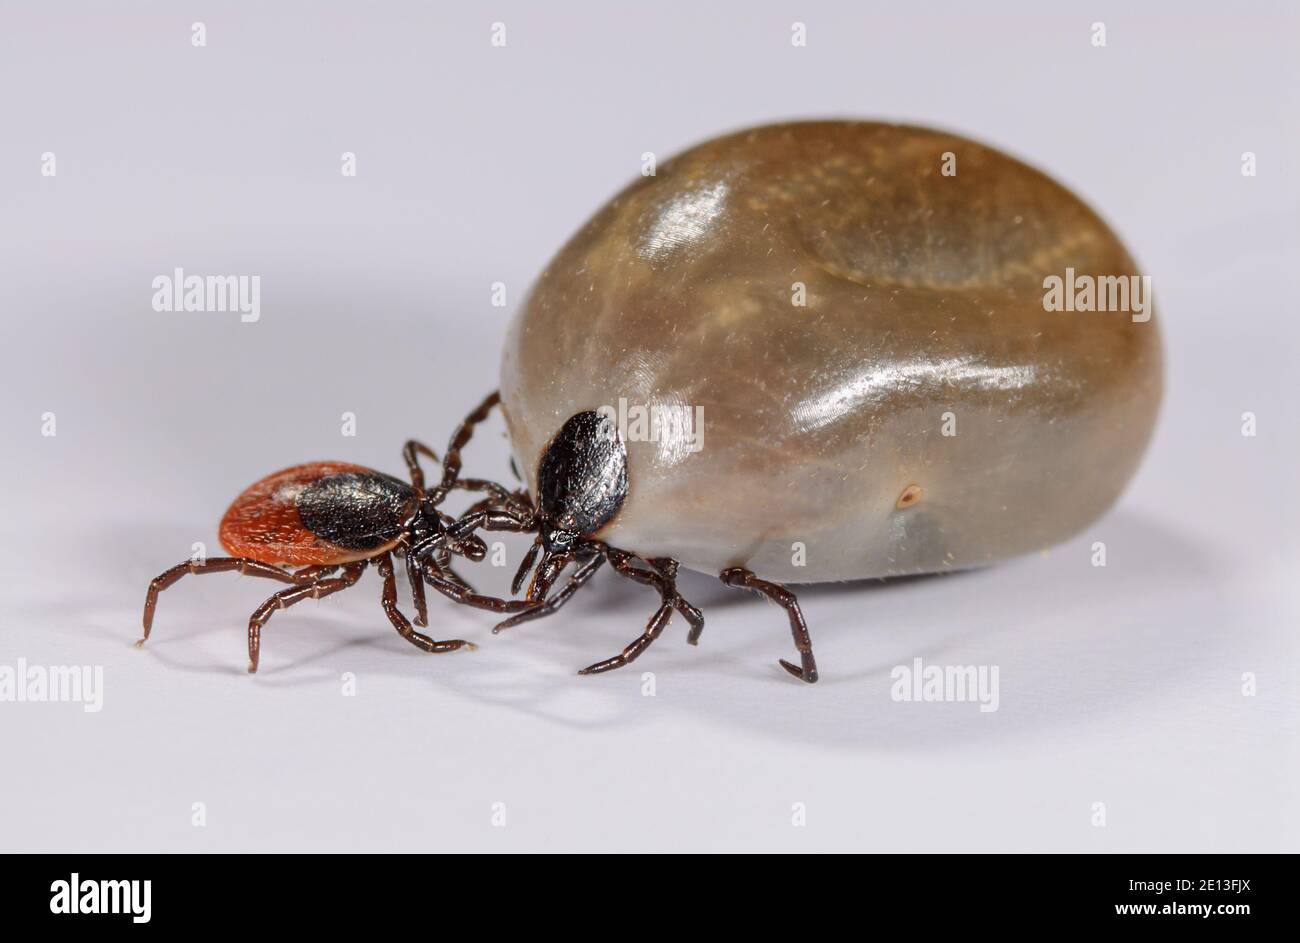 Tick before and after blood meal Stock Photo